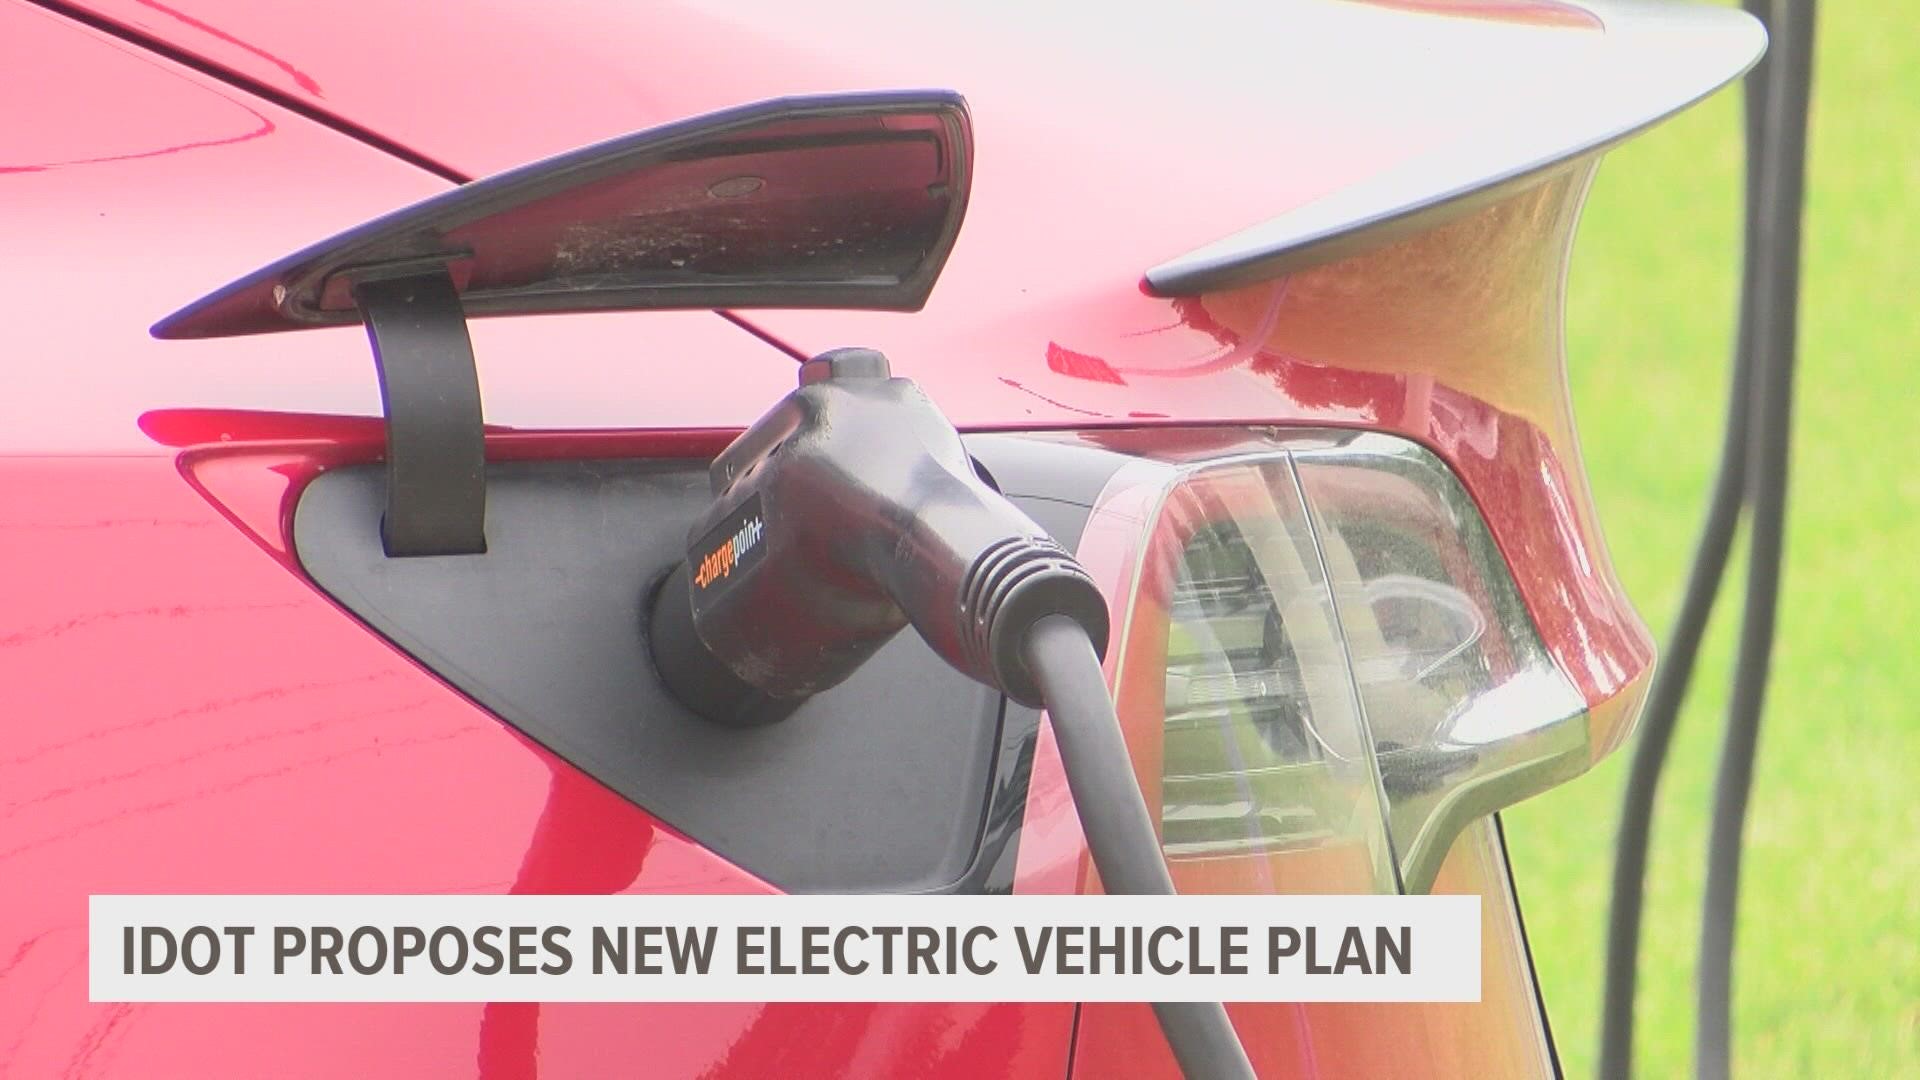 In order to receive roughly $51 million in federal dollars, IDOT had to propose how it would use the funding to improve electric vehicle infrastructure.